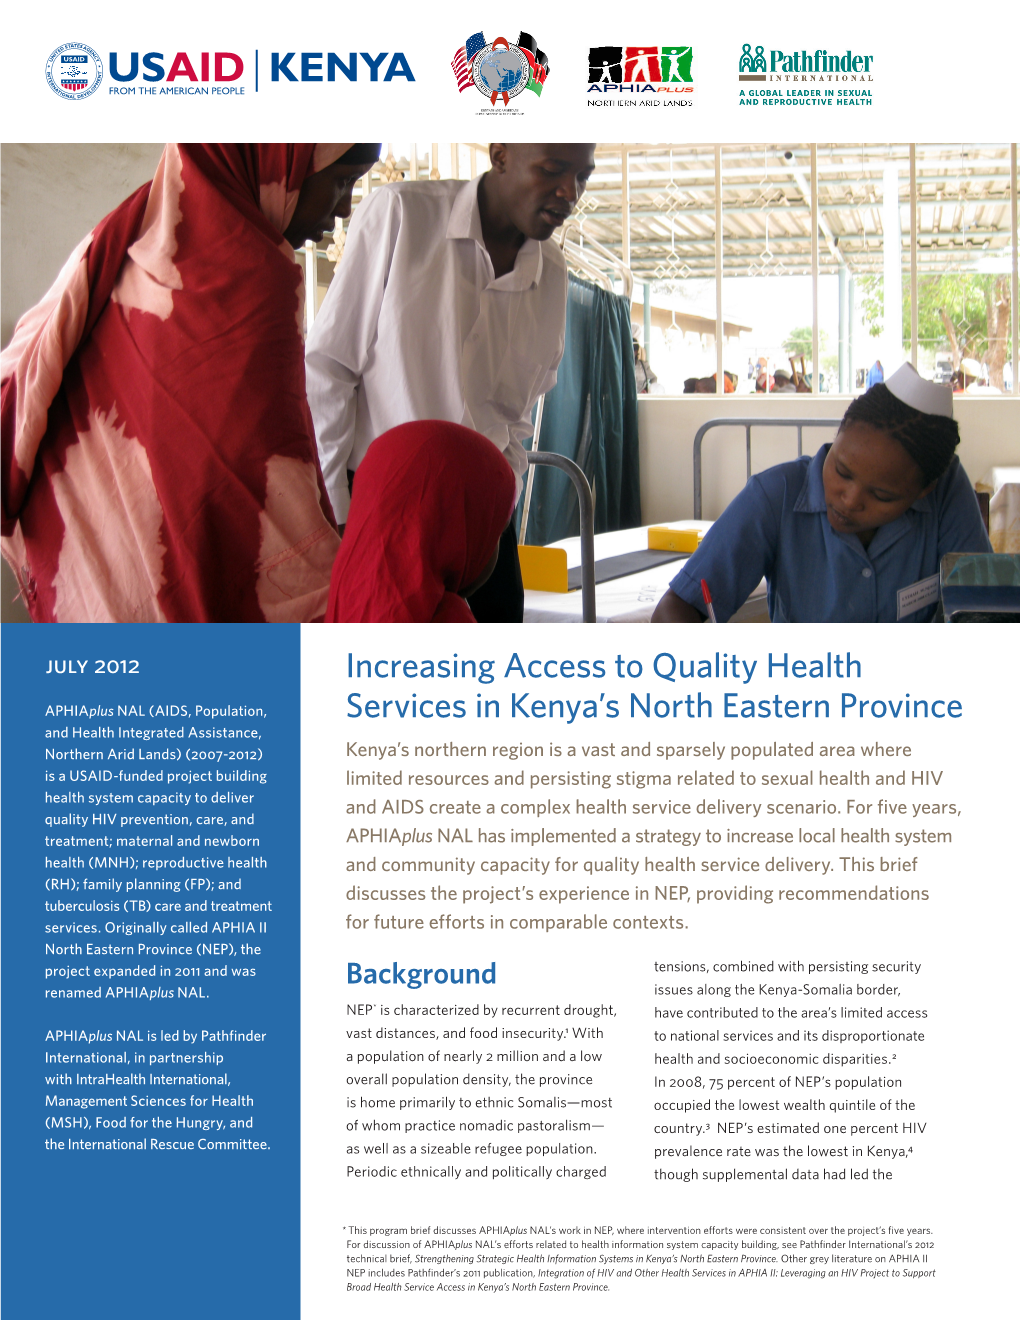 Increasing Access to Quality Health Services in Kenya's North Eastern